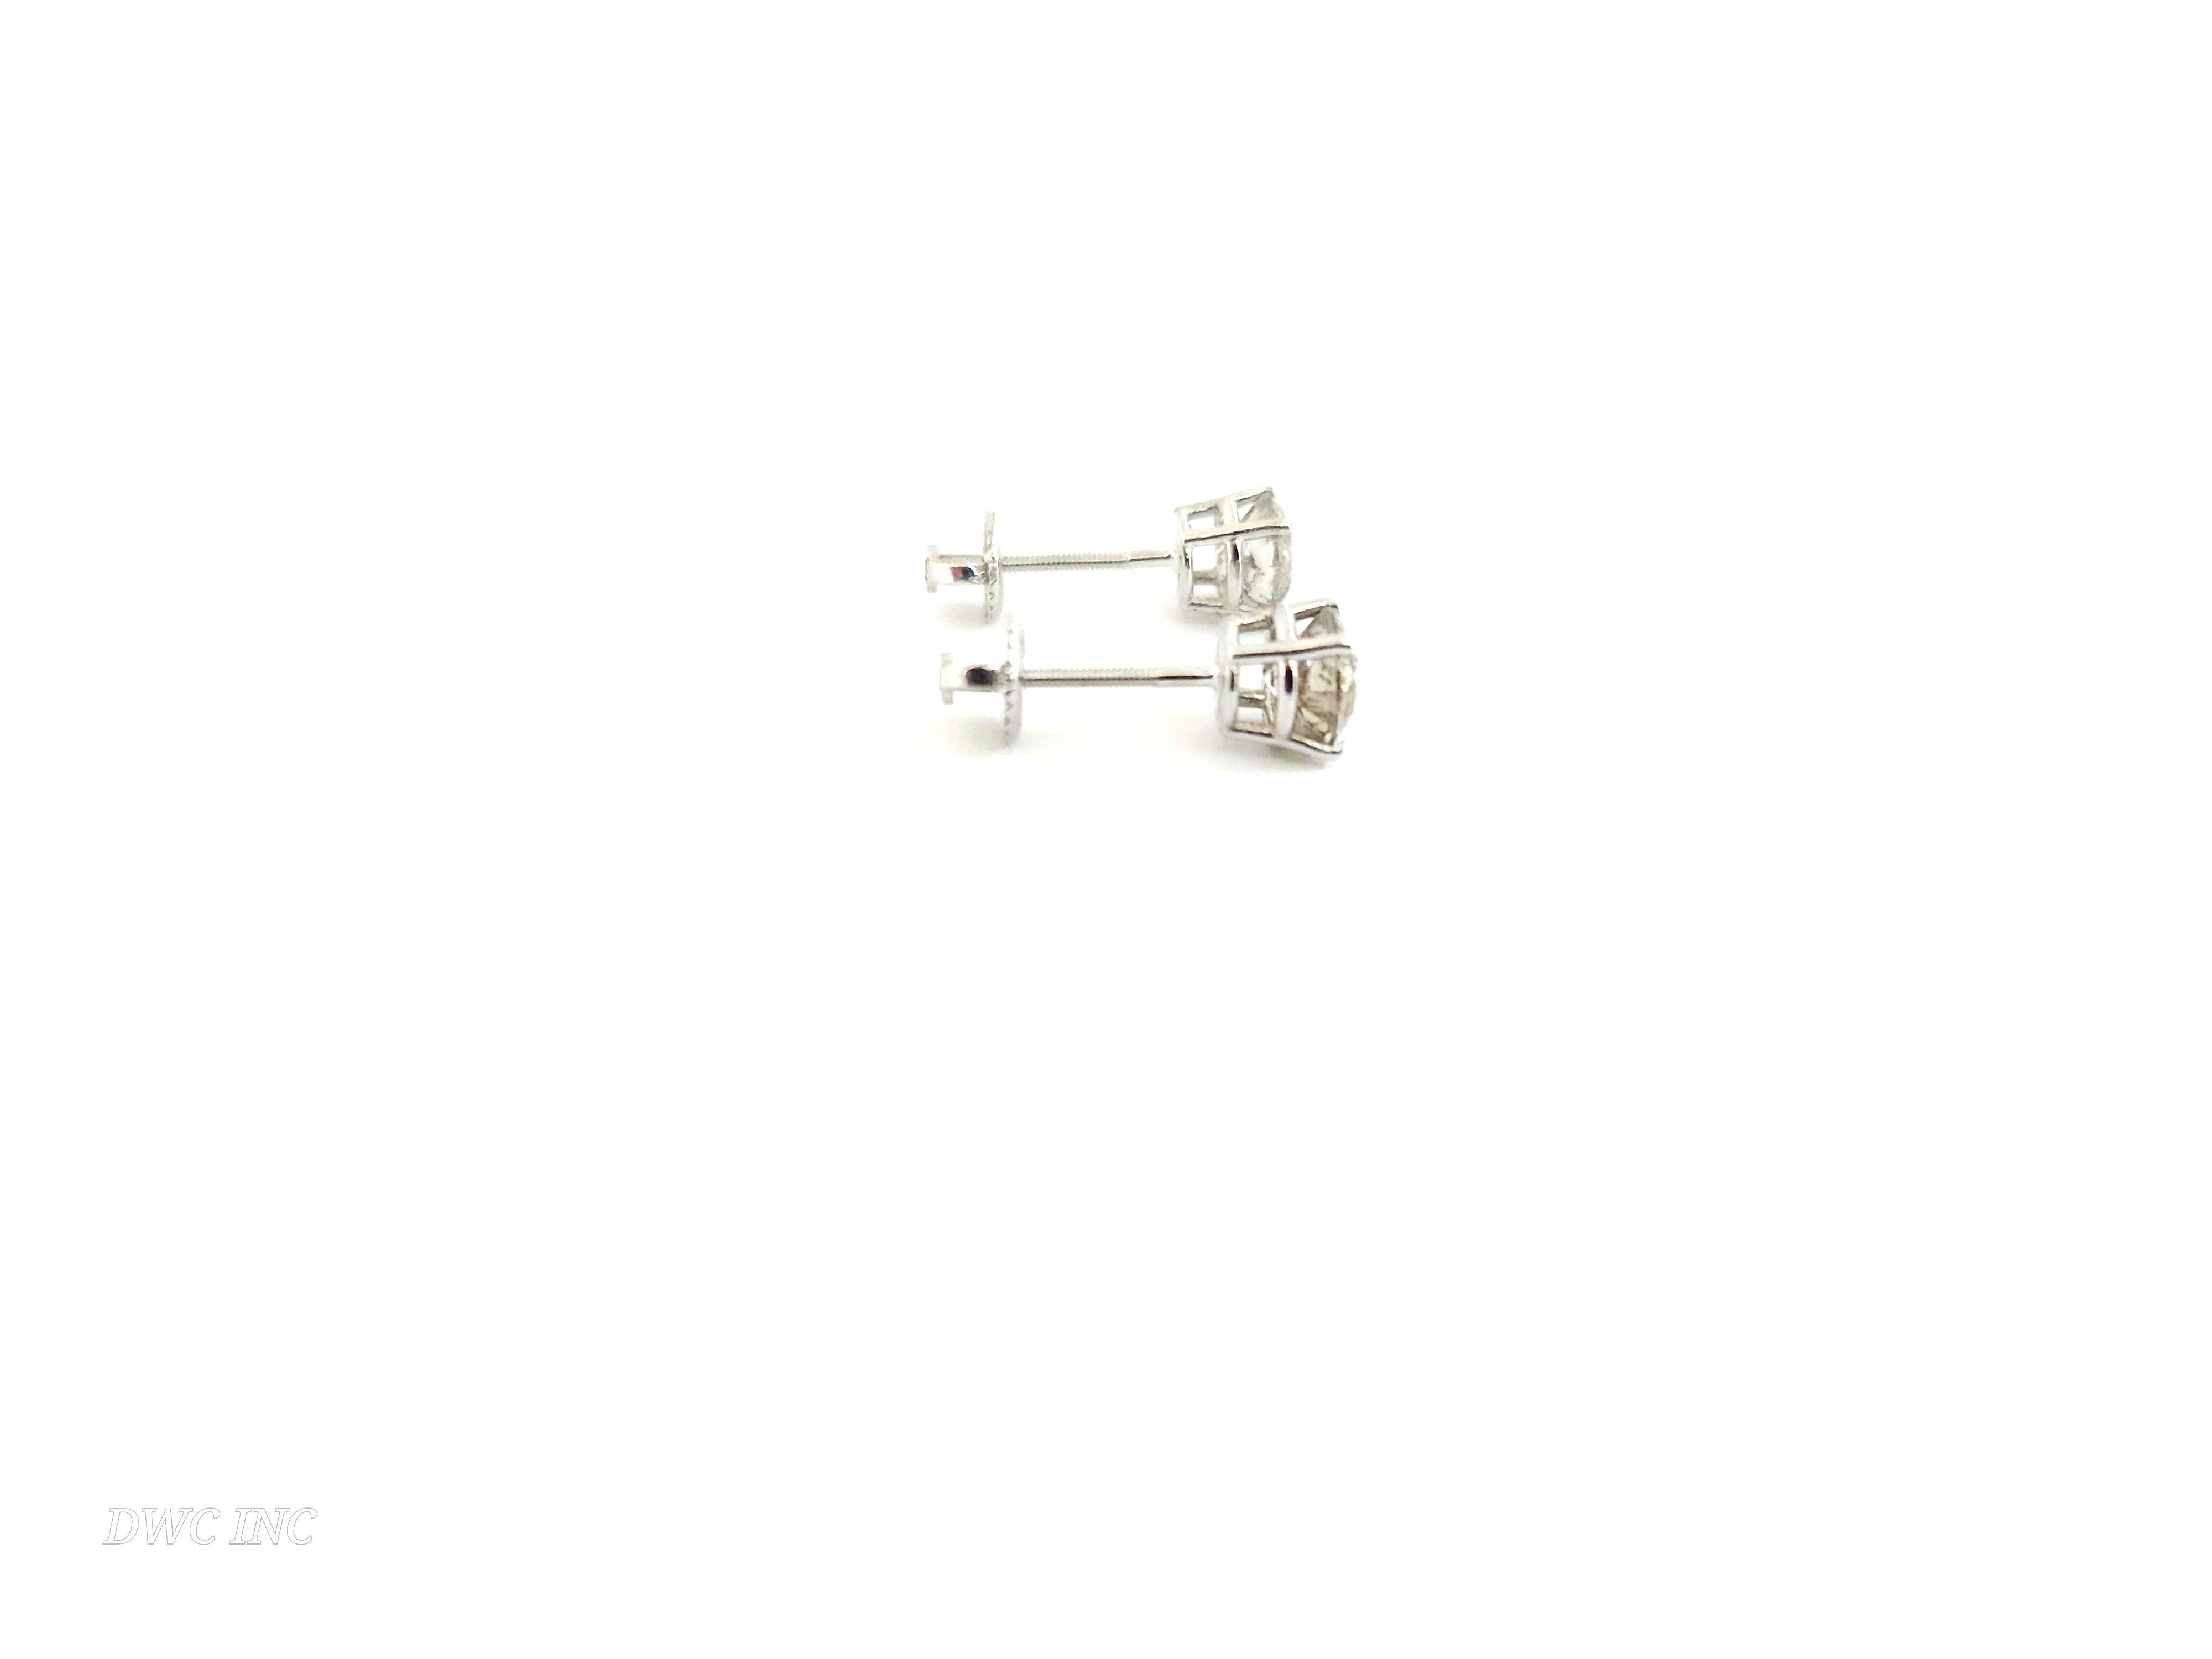 1.69 Ctw Natural Diamond Round Studs White Gold, average color I-J clarity I2,sqrue back.

*Free shipping within U.S*